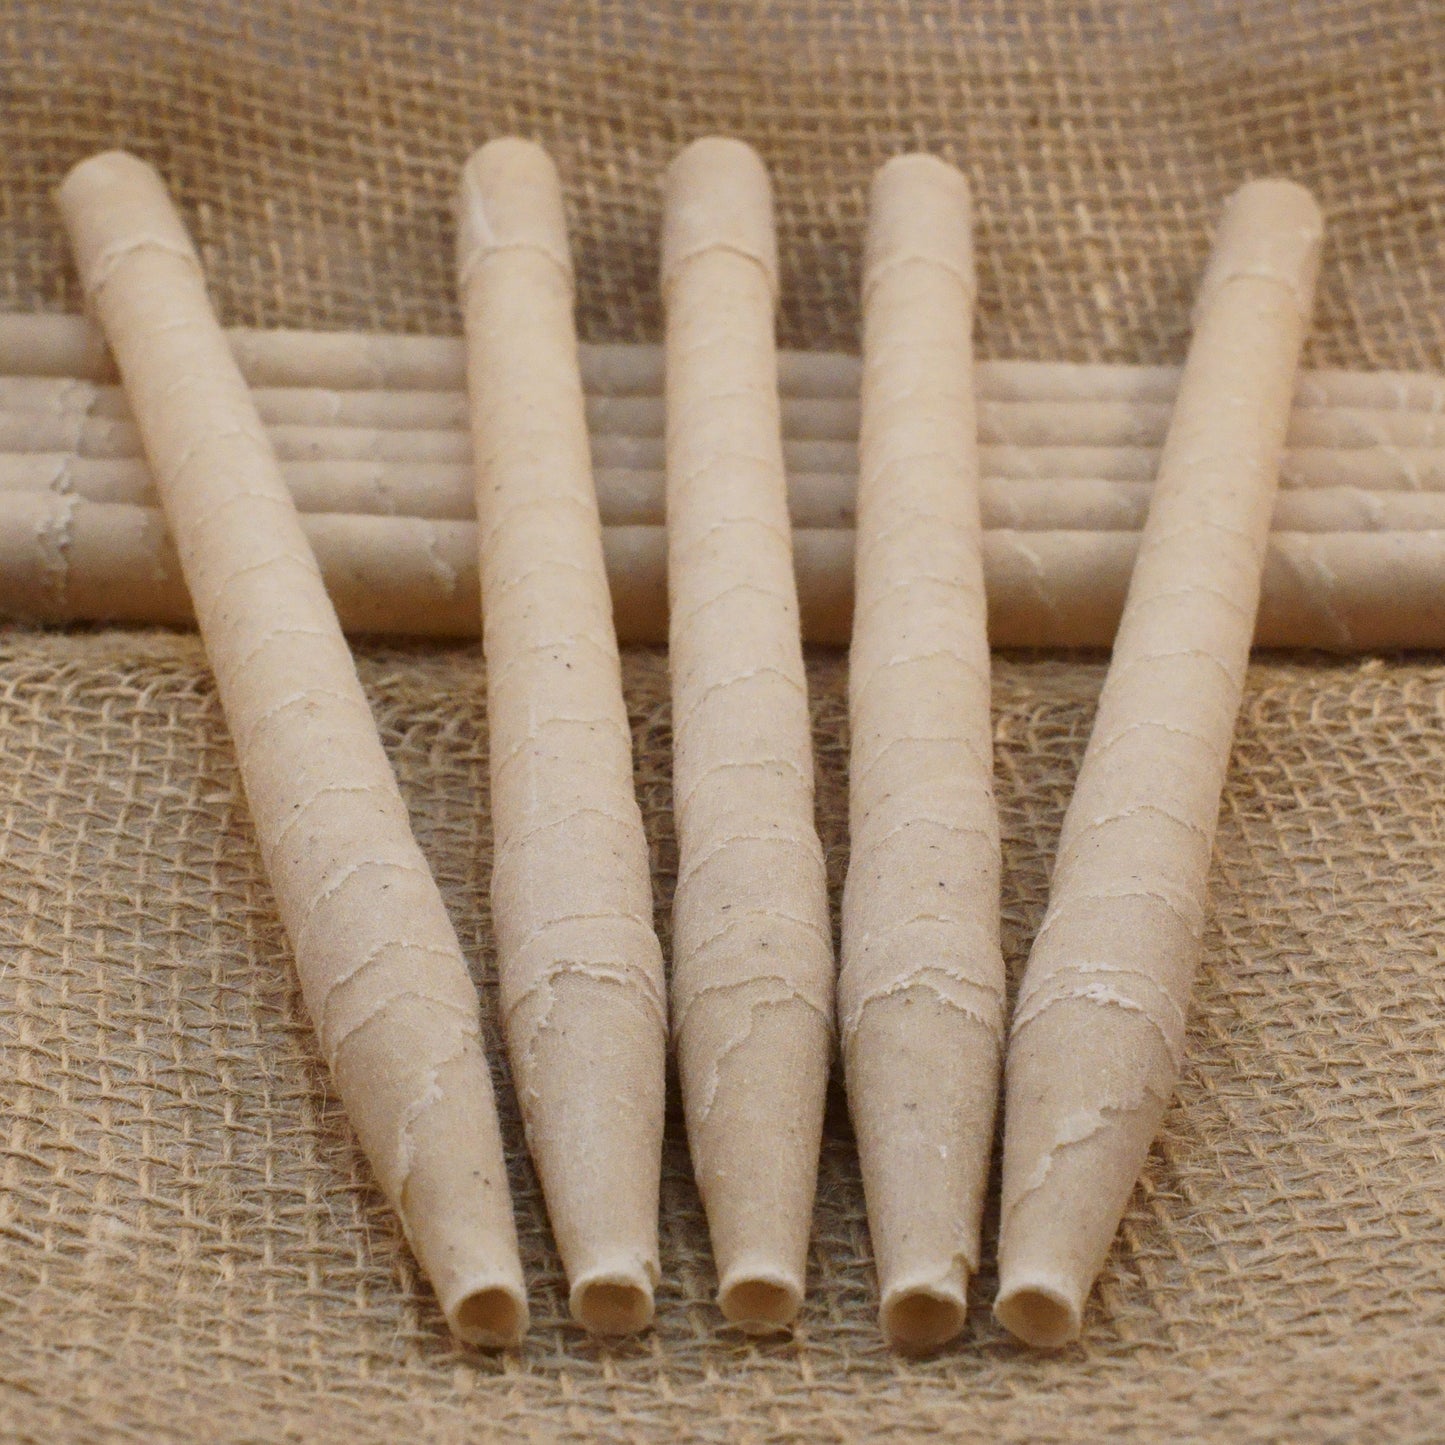 Herbal Ear Candles 10pk Infused w/Lavender, Eucalyptus, & Tea Tree Essential Oils - Made in the USA